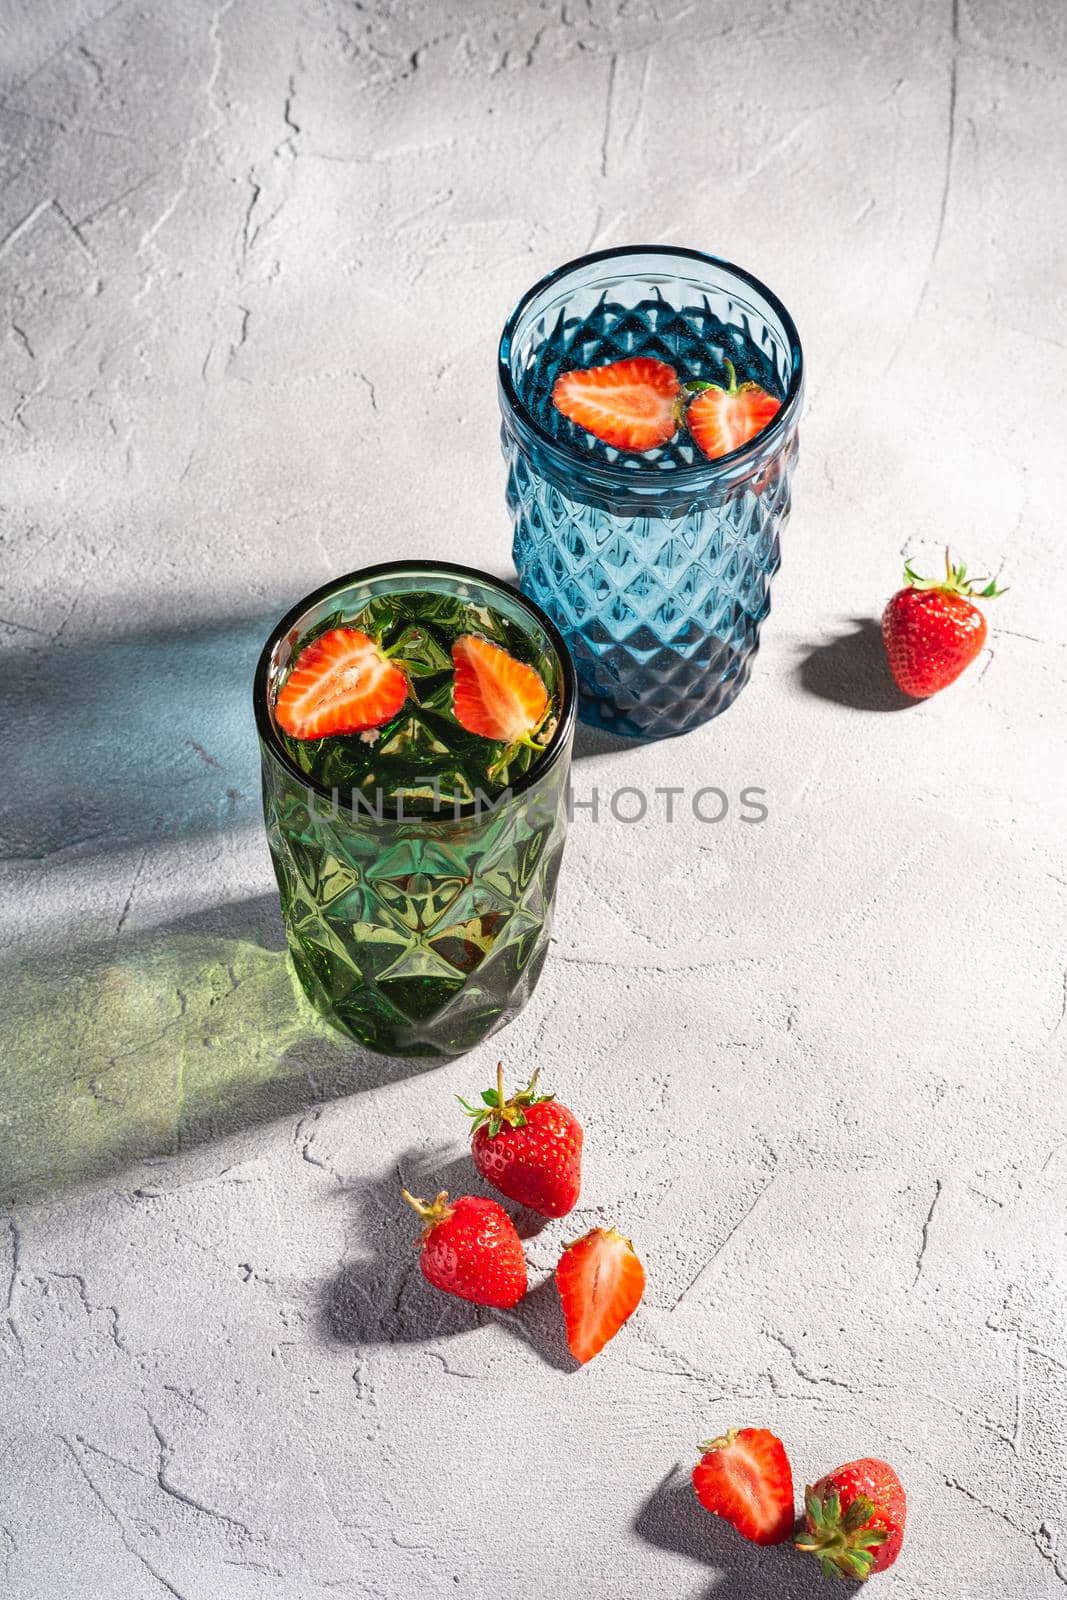 Two green and blue geometric glass cup with fresh water and strawberry fruits with colorful shadow light rays on stone concrete background, angle view